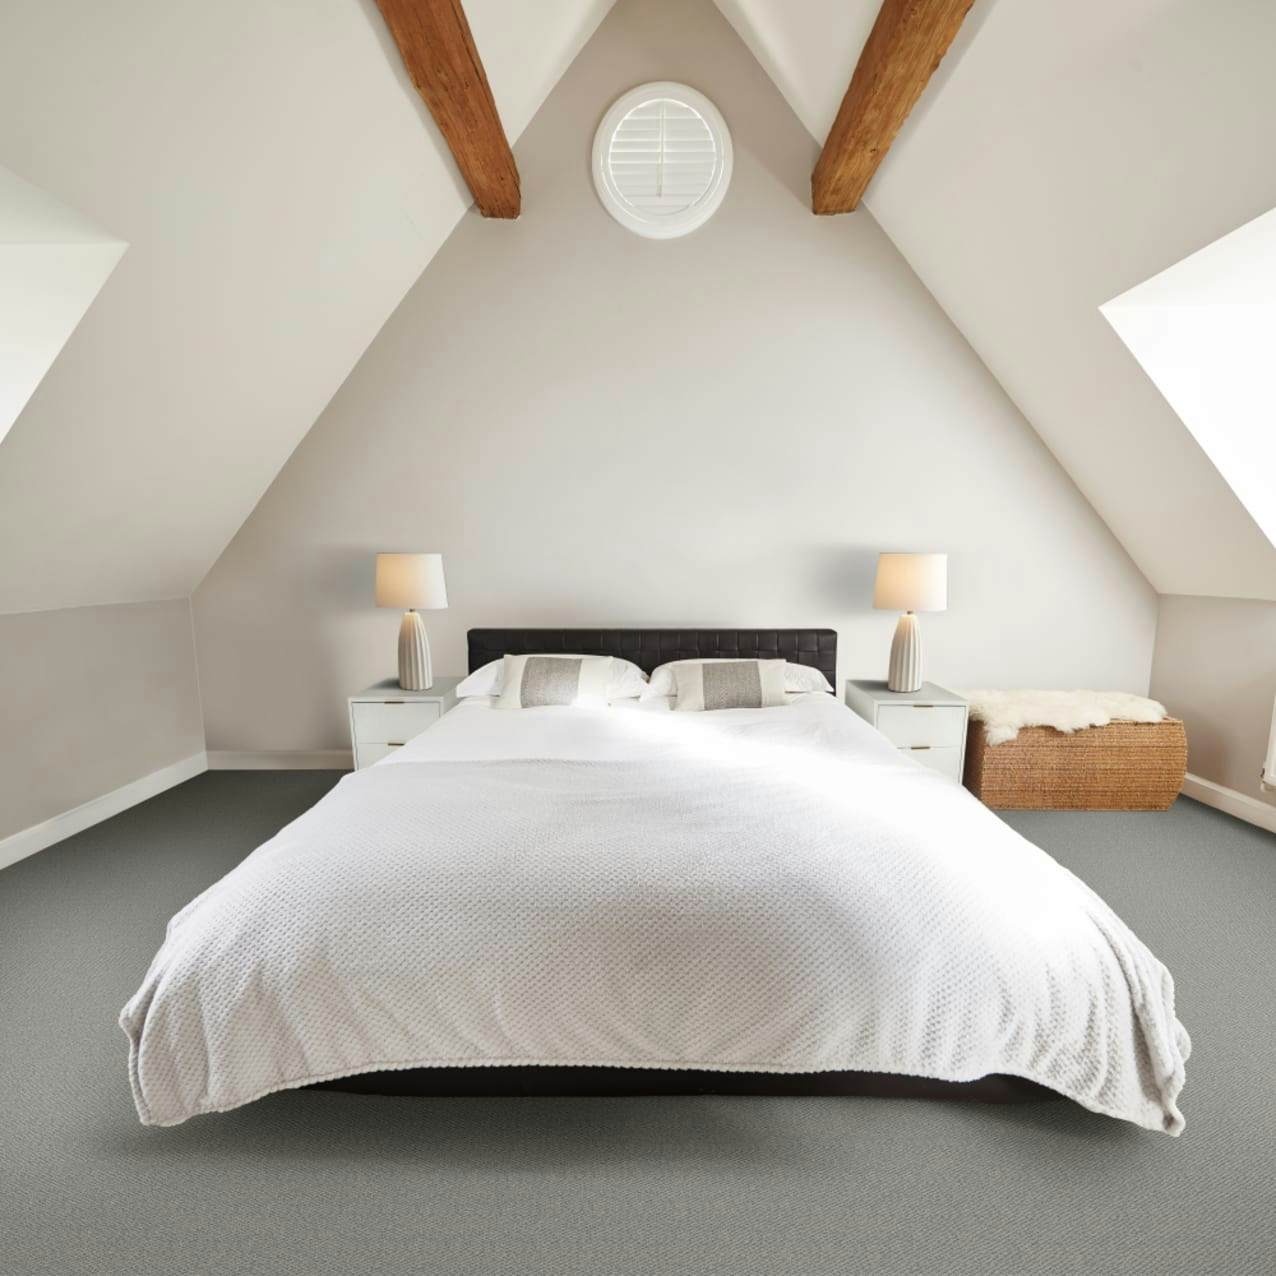 Montpelier Gray wool carpet in attic bedroom wall-to-wall installation